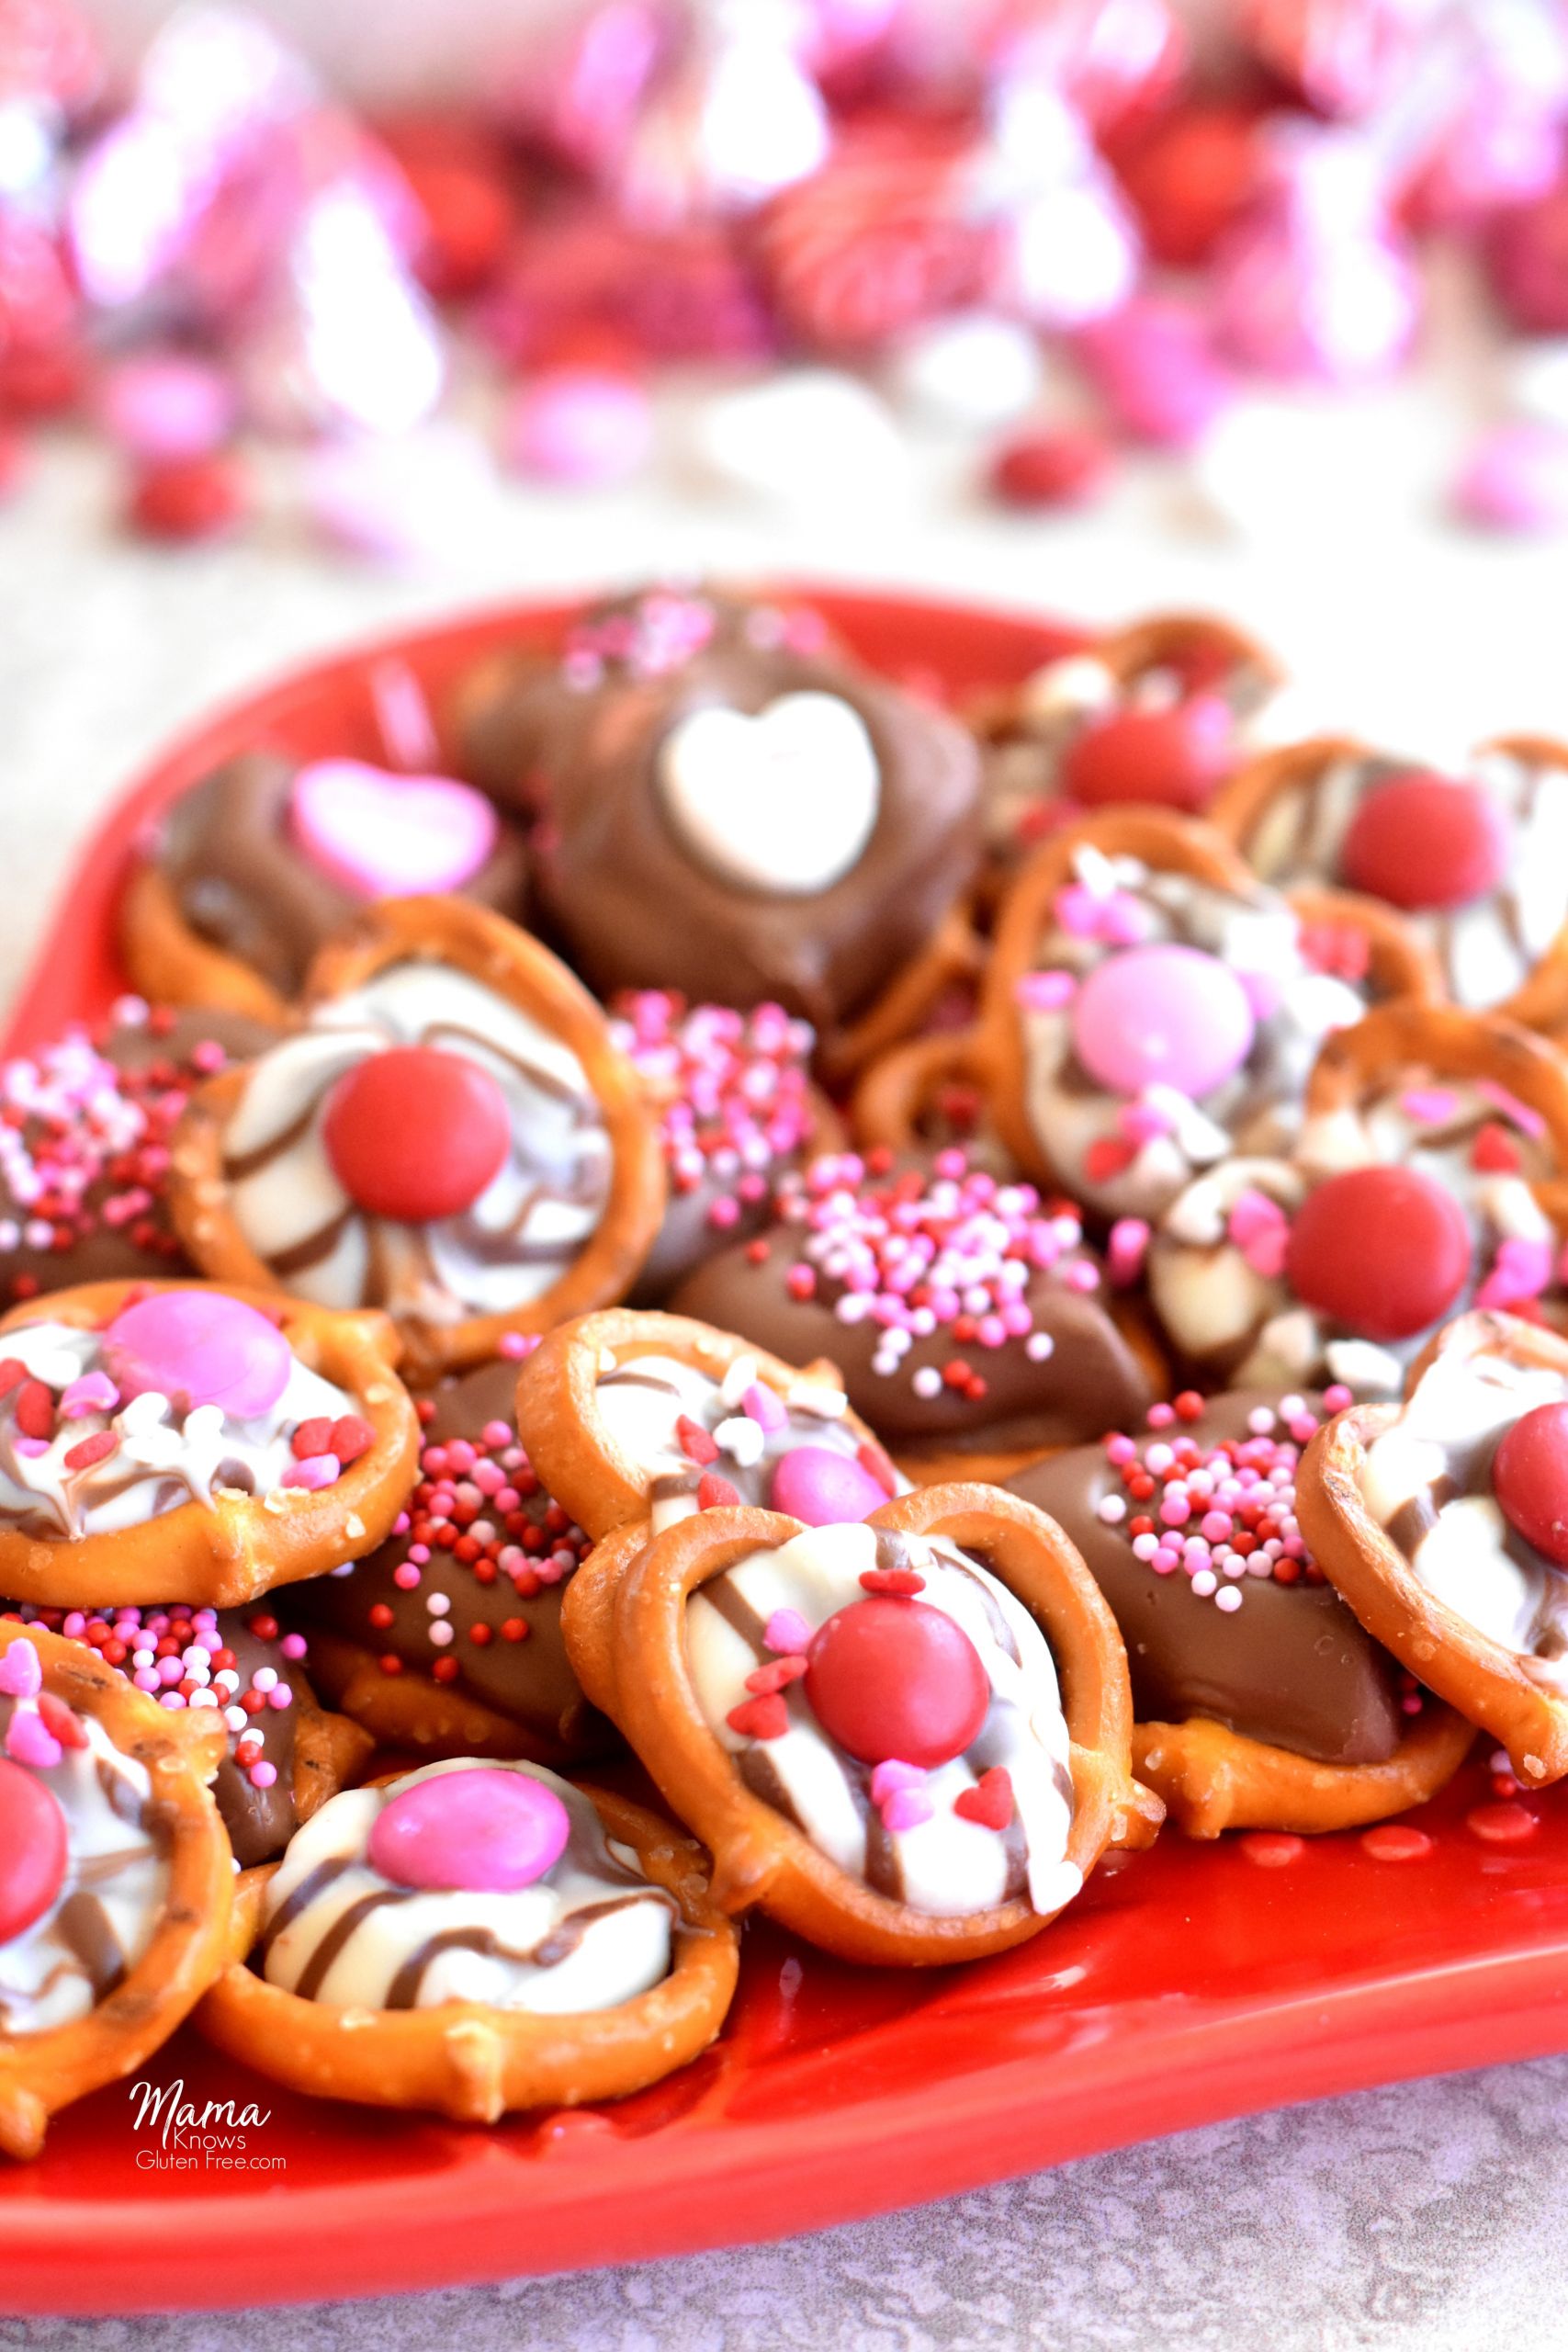 Chocolate Covered Pretzels For Valentine Day
 Gluten Free Chocolate Covered Pretzels for Valentine s Day